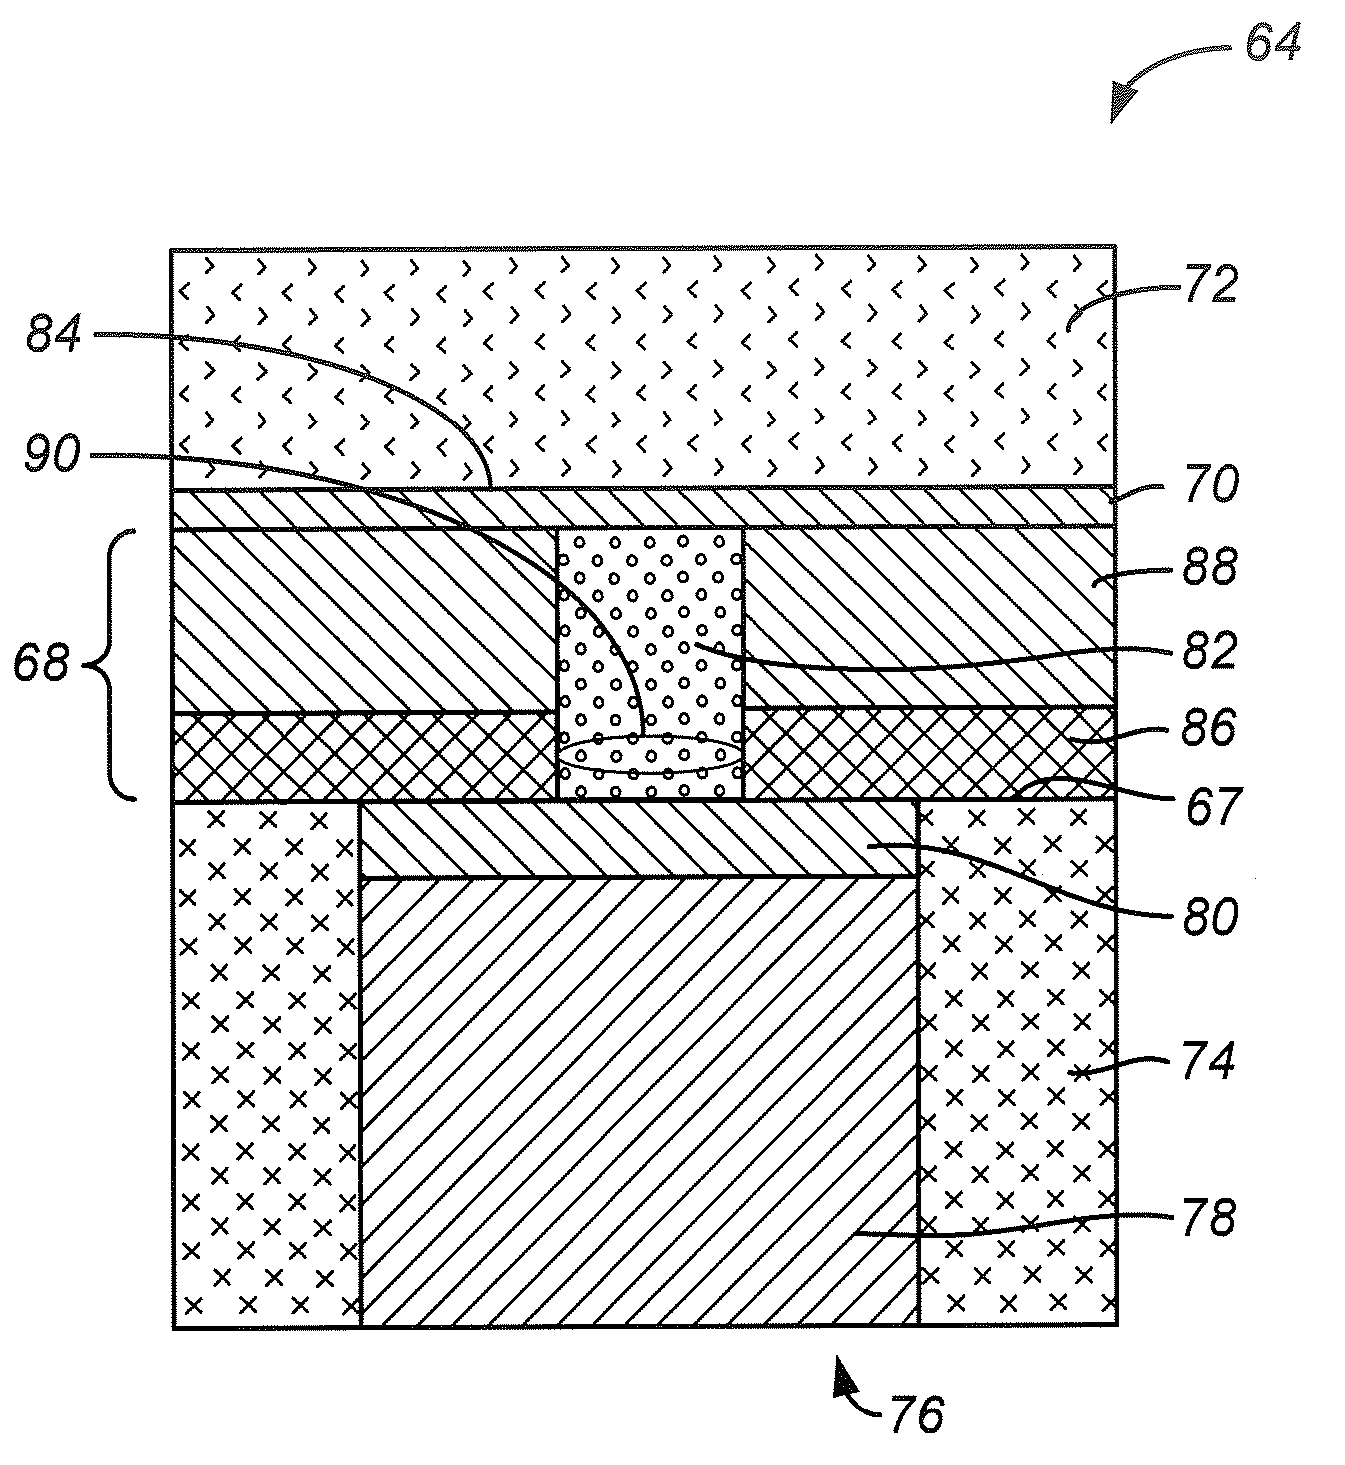 Memory cell sidewall contacting side electrode